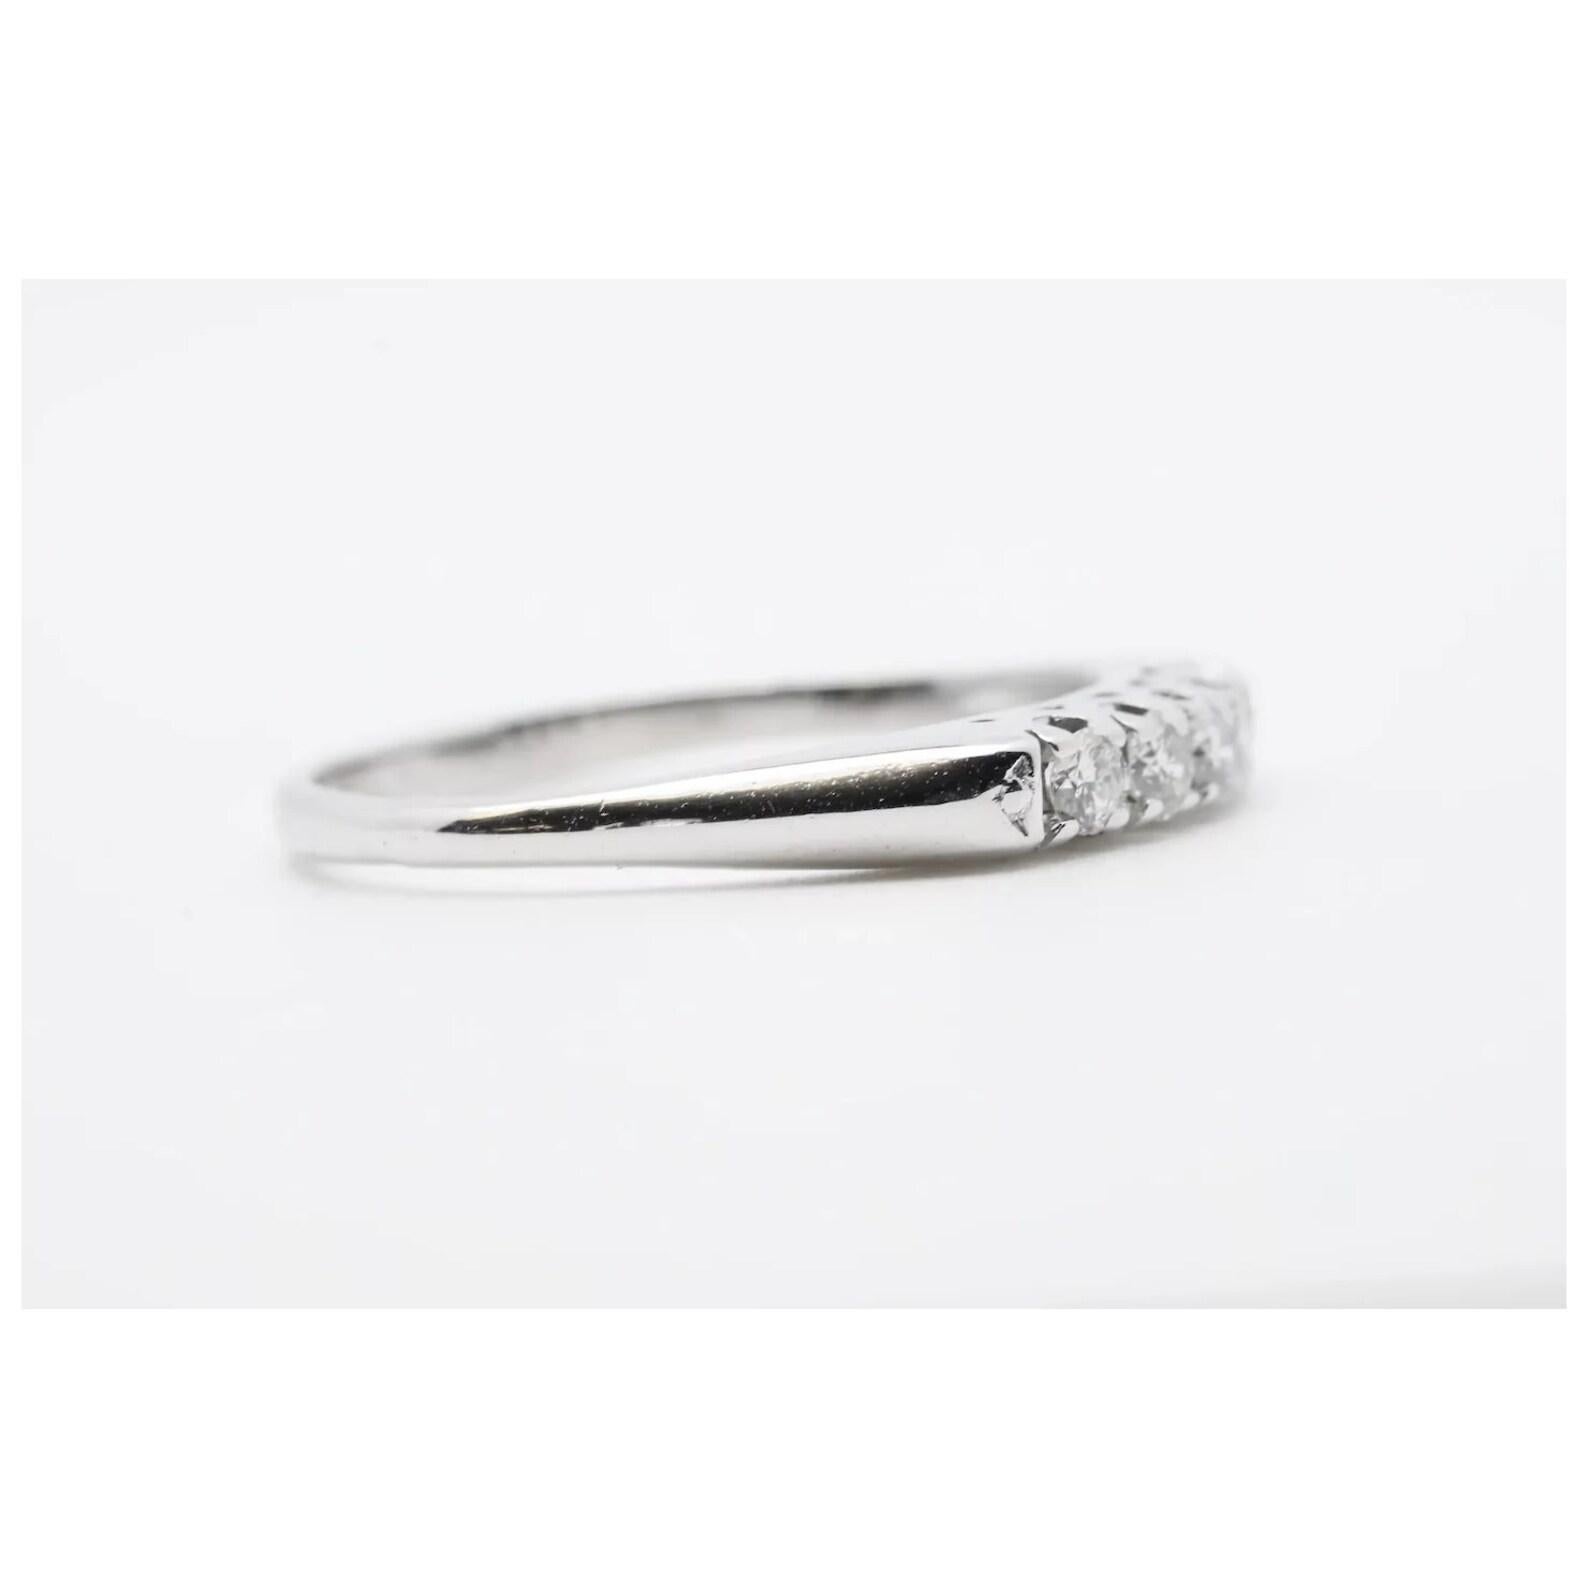 A vintage 1950's mid century platinum and diamond wedding band. Set with five round brilliant cut diamonds weighing a combined 0.20 carats. The diamonds grade as G color, VS1 clarity and are secured by shared platinum prongs.

In excellent